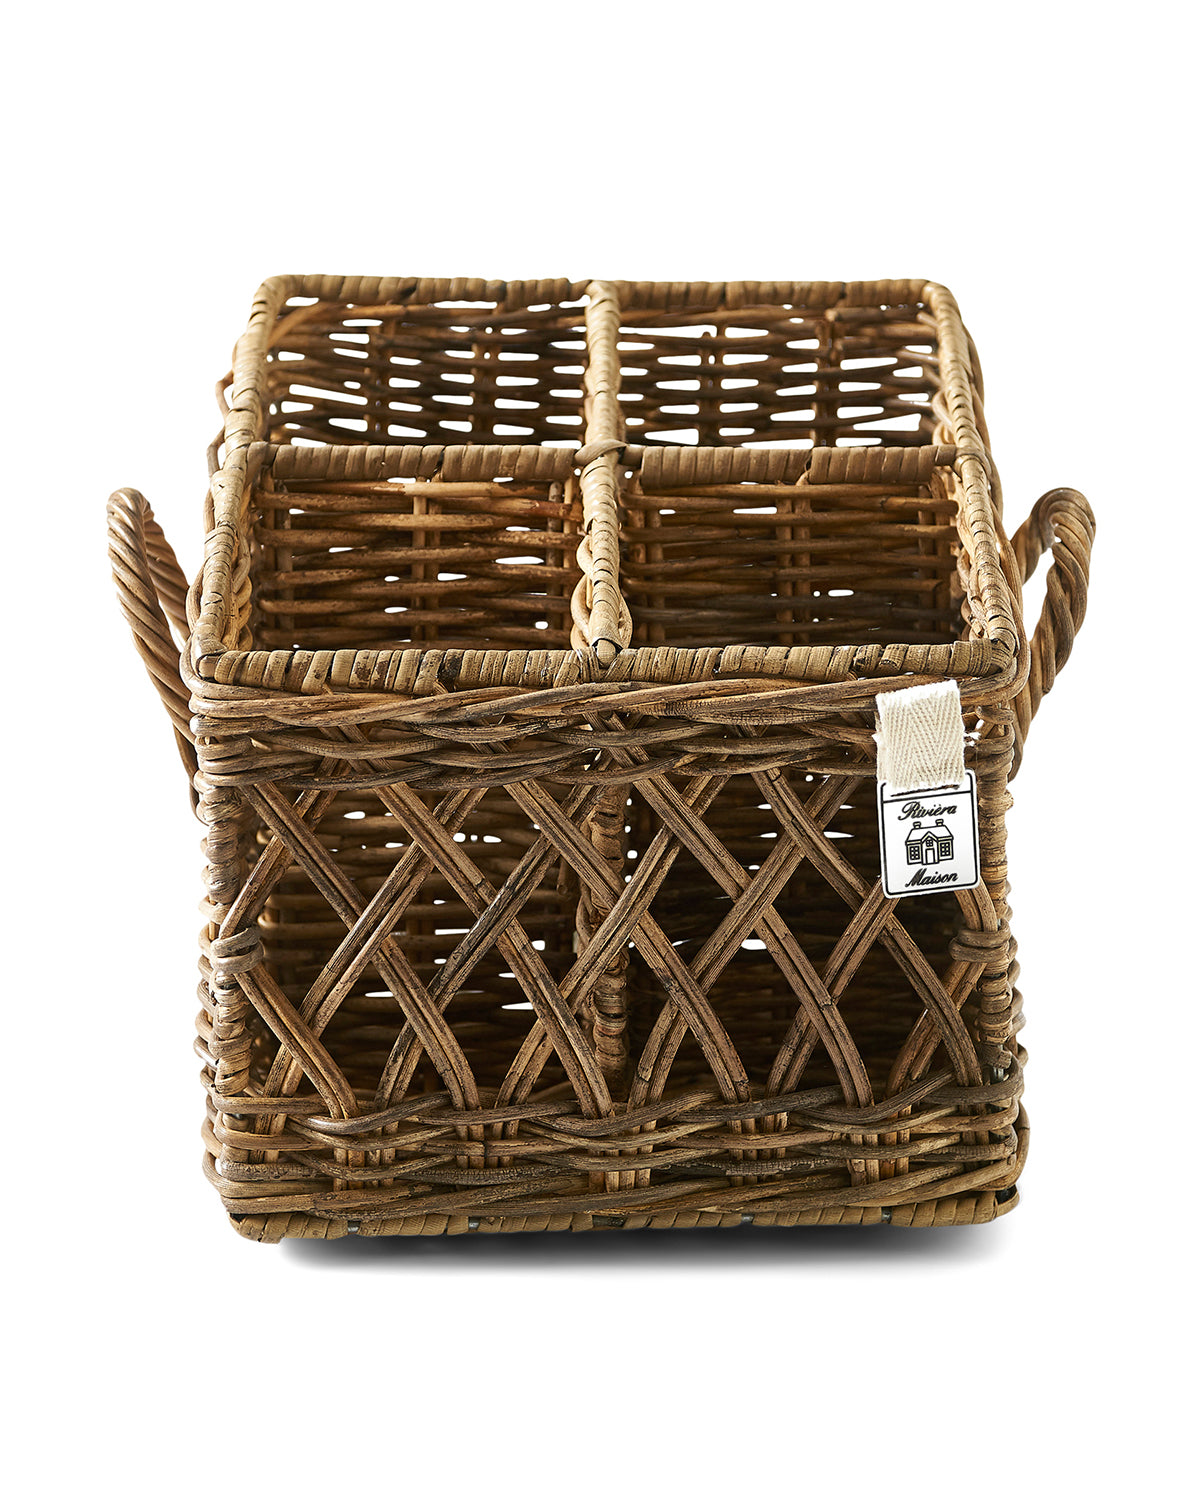 COUVERT BASKET SQUARE made of gray-colored reeds by Riviera Maison